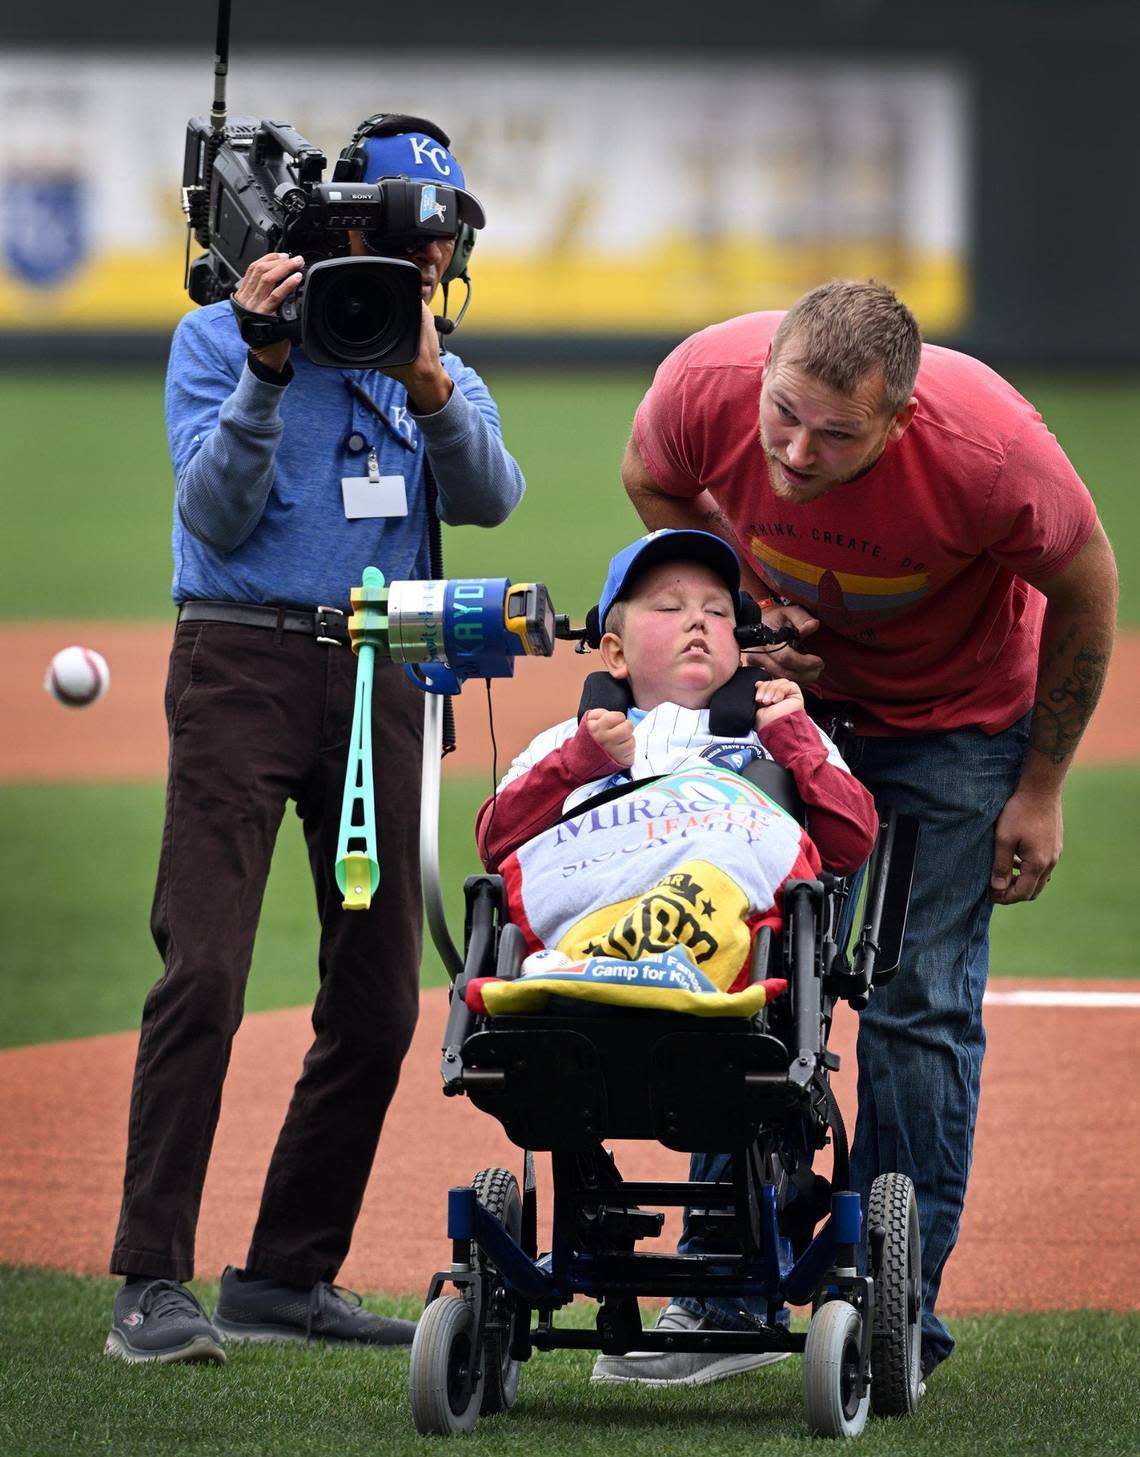 Kayden Rhoades was given 24 hours to live at birth, but 15 years later he threw out the first pitch on Thursday at Kauffman Stadium with the help of his family. Rhoades, who was born with hydranencephaly, used a device his father Dustin created for him to complete the feat. It was a bucket list day in every way for the family from Sioux City, Iowa.